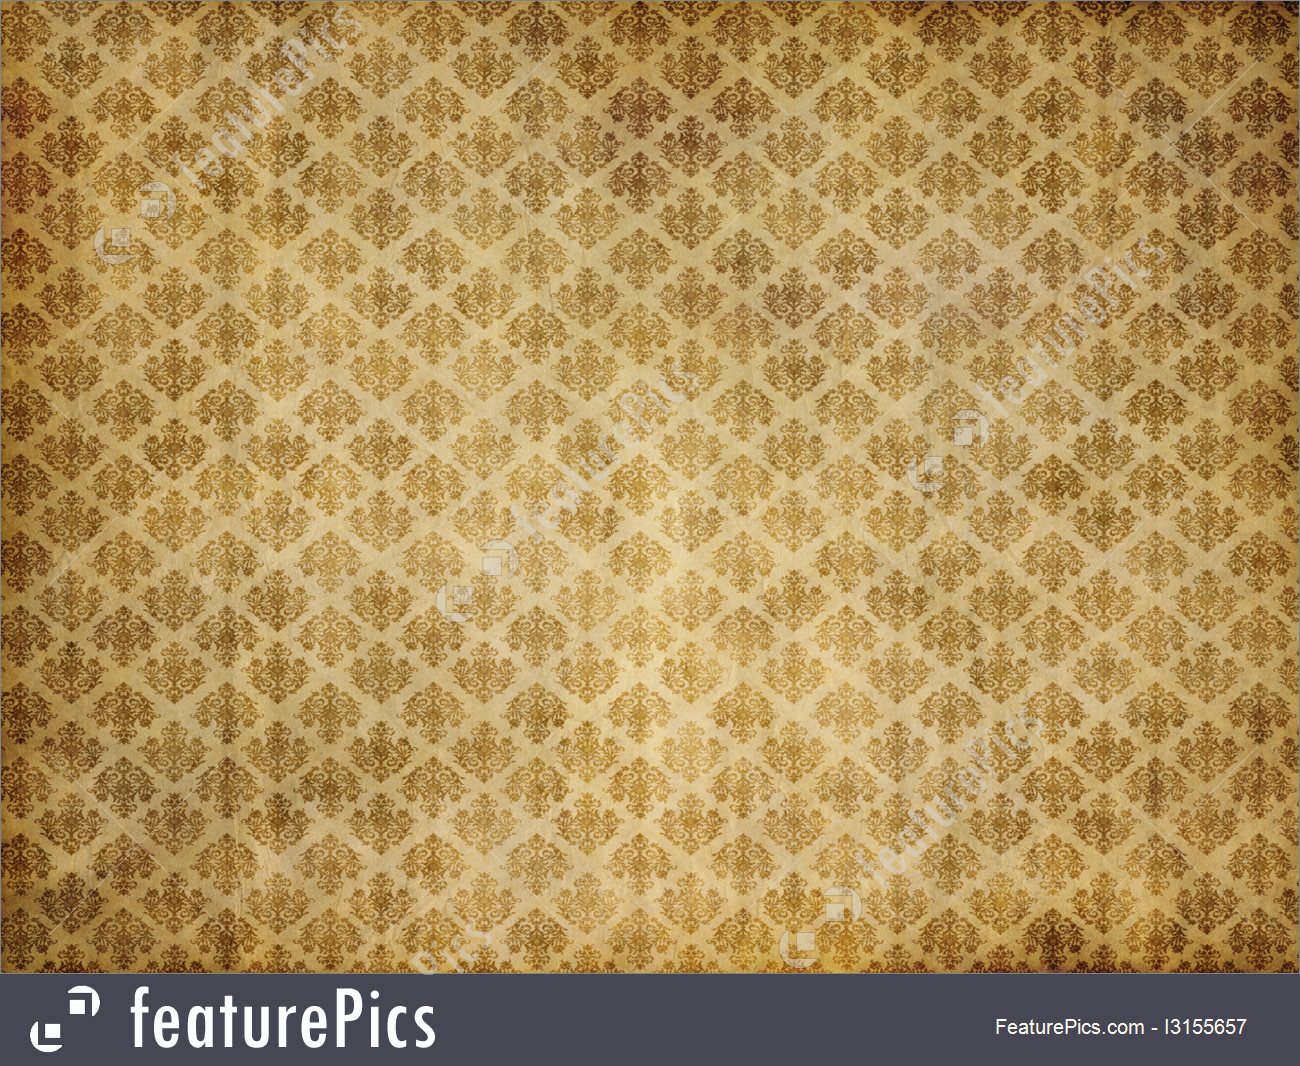 Old Brown And Yellow Damask Patterned Wallpaper - Illustration - HD Wallpaper 